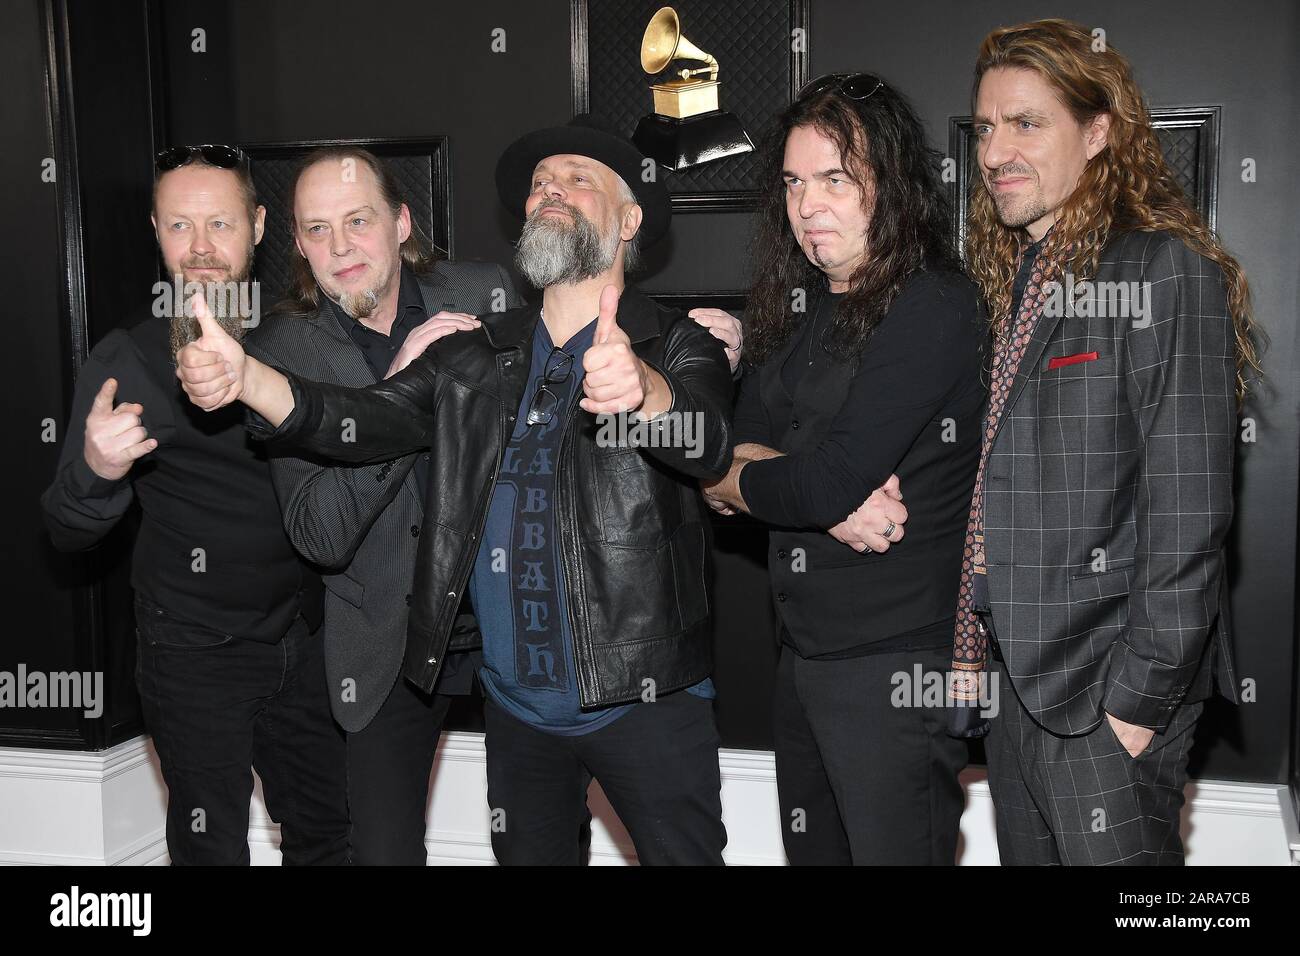 Los Angeles, CA, USA. 26th Jan 2020. Jan Lindh, Lars Johansson, Leif Edling, Bjšrkman, Johan LŠngqvist of Candlemass arrive at the 62nd Annual Grammy Awards red carpet held at the Staples Center on January 26, 2020 in Los Angeles, California, United States. (Photo by Sthanlee B. Mirador/Sipa USA) Credit: Sipa USA/Alamy Live News Stock Photo